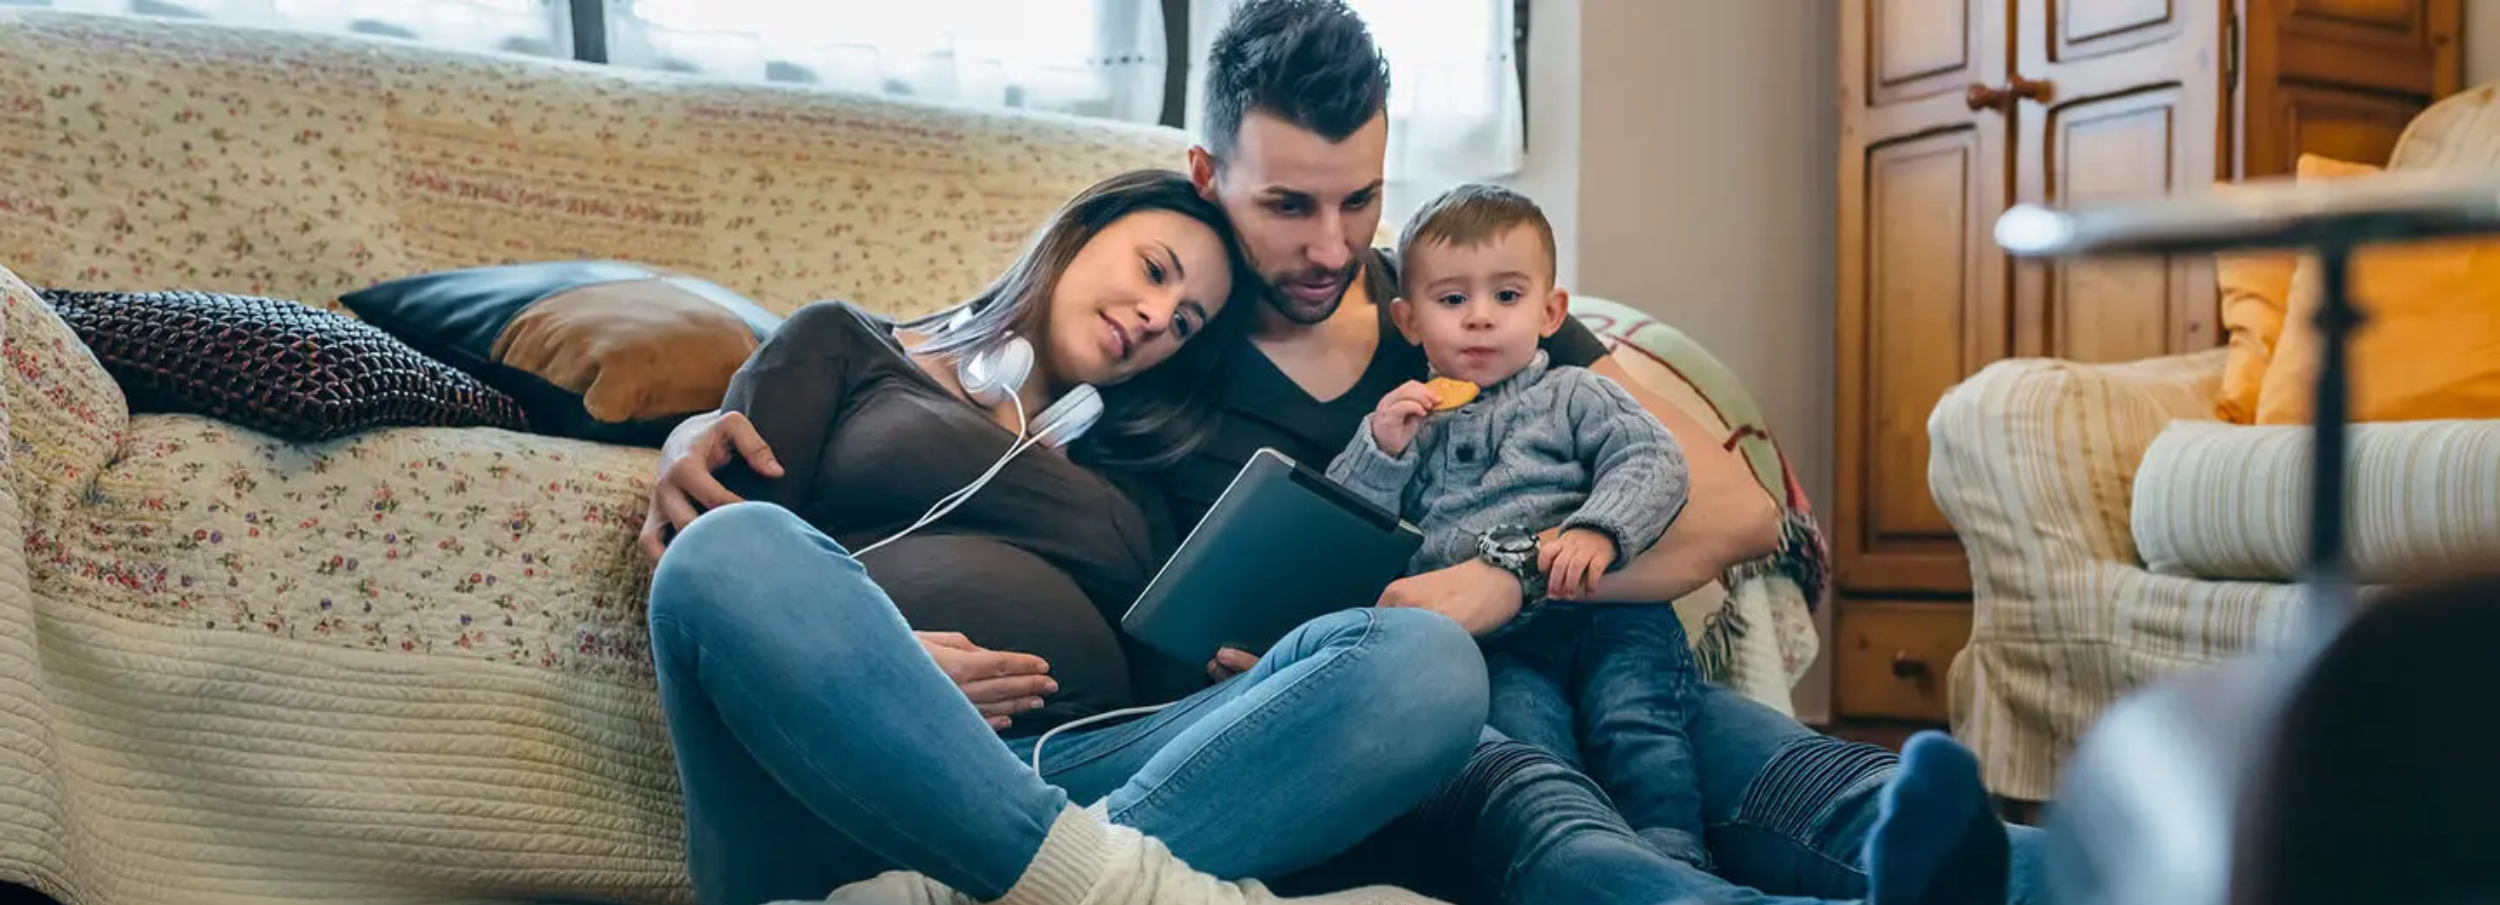 Pregnant mother, father, and son staring at tablet device on living room floor.